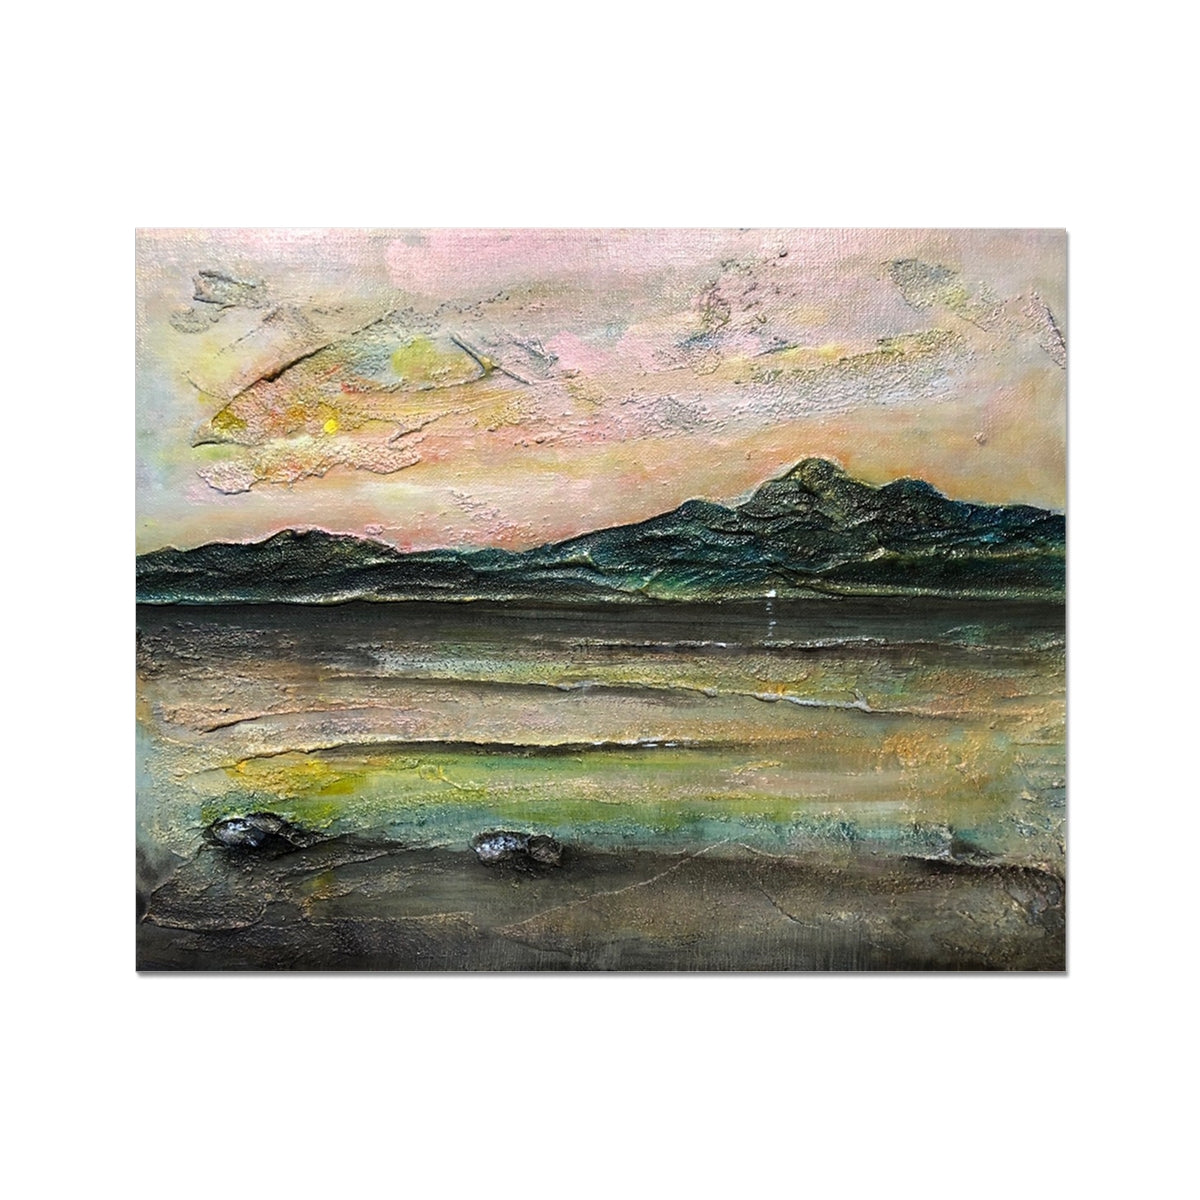 An Ethereal Loch Na Dal Skye Painting | Hahnemühle German Etching Prints From Scotland-Fine art-Scottish Lochs & Mountains Art Gallery-20"x16"-Paintings, Prints, Homeware, Art Gifts From Scotland By Scottish Artist Kevin Hunter